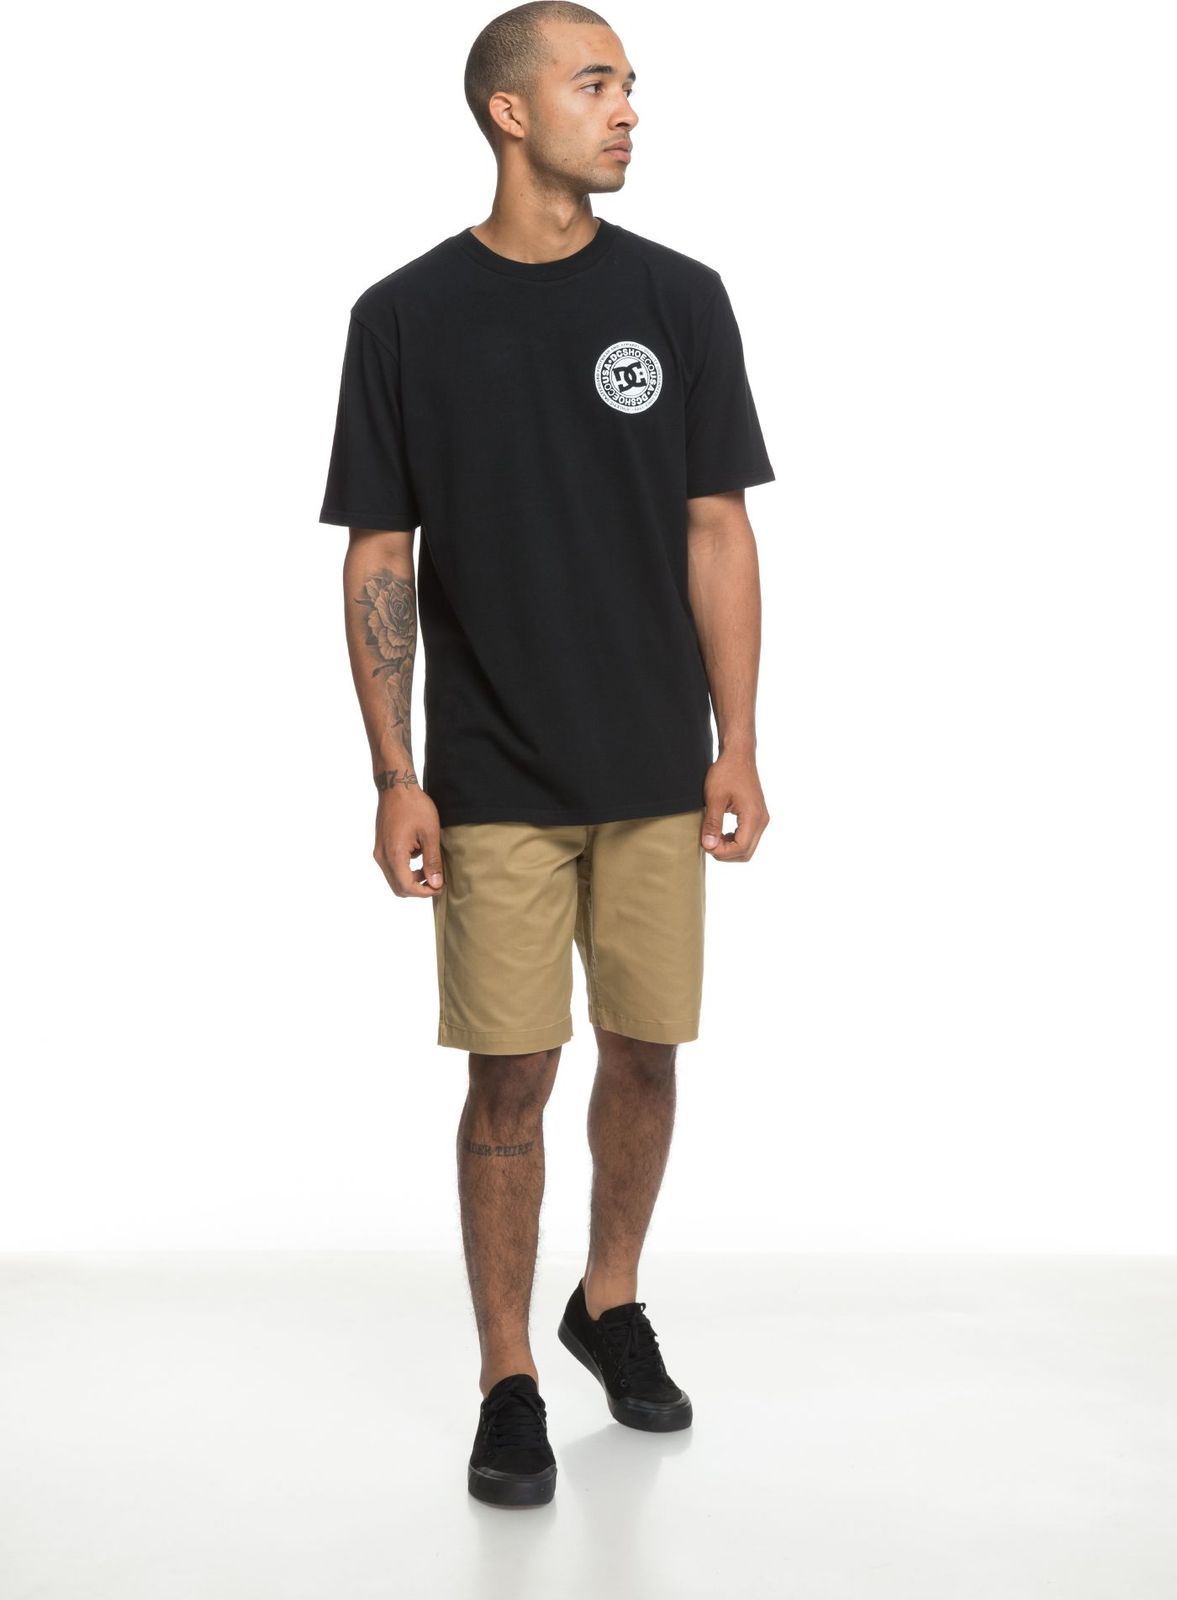   DC Shoes Worker Straight, : . EDYWS03111-CLM0.  28 (42)